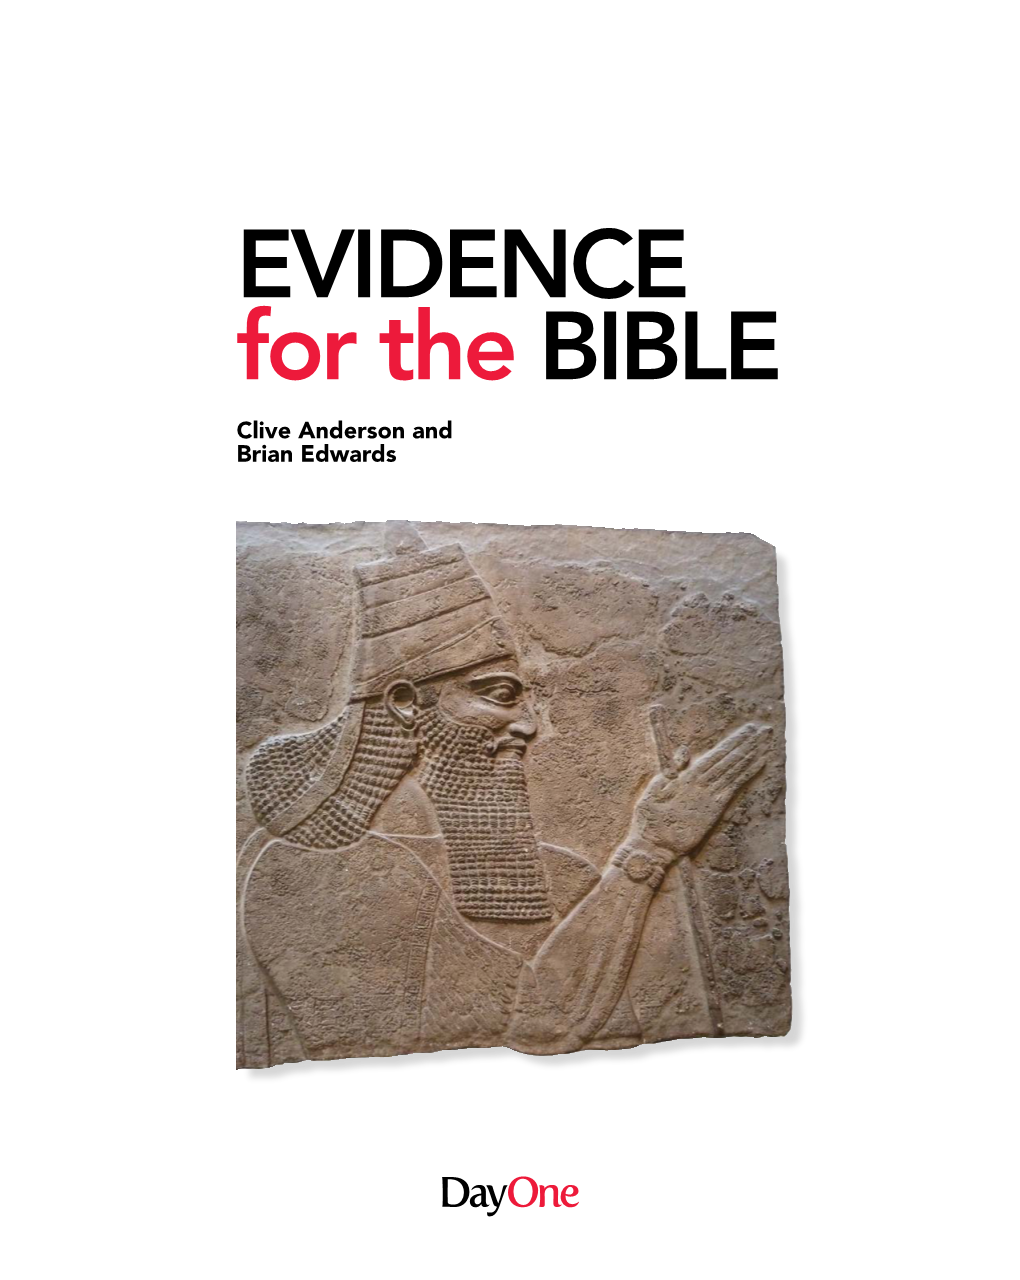 EVIDENCE for the BIBLE Clive Anderson and Brian Edwards Dedication